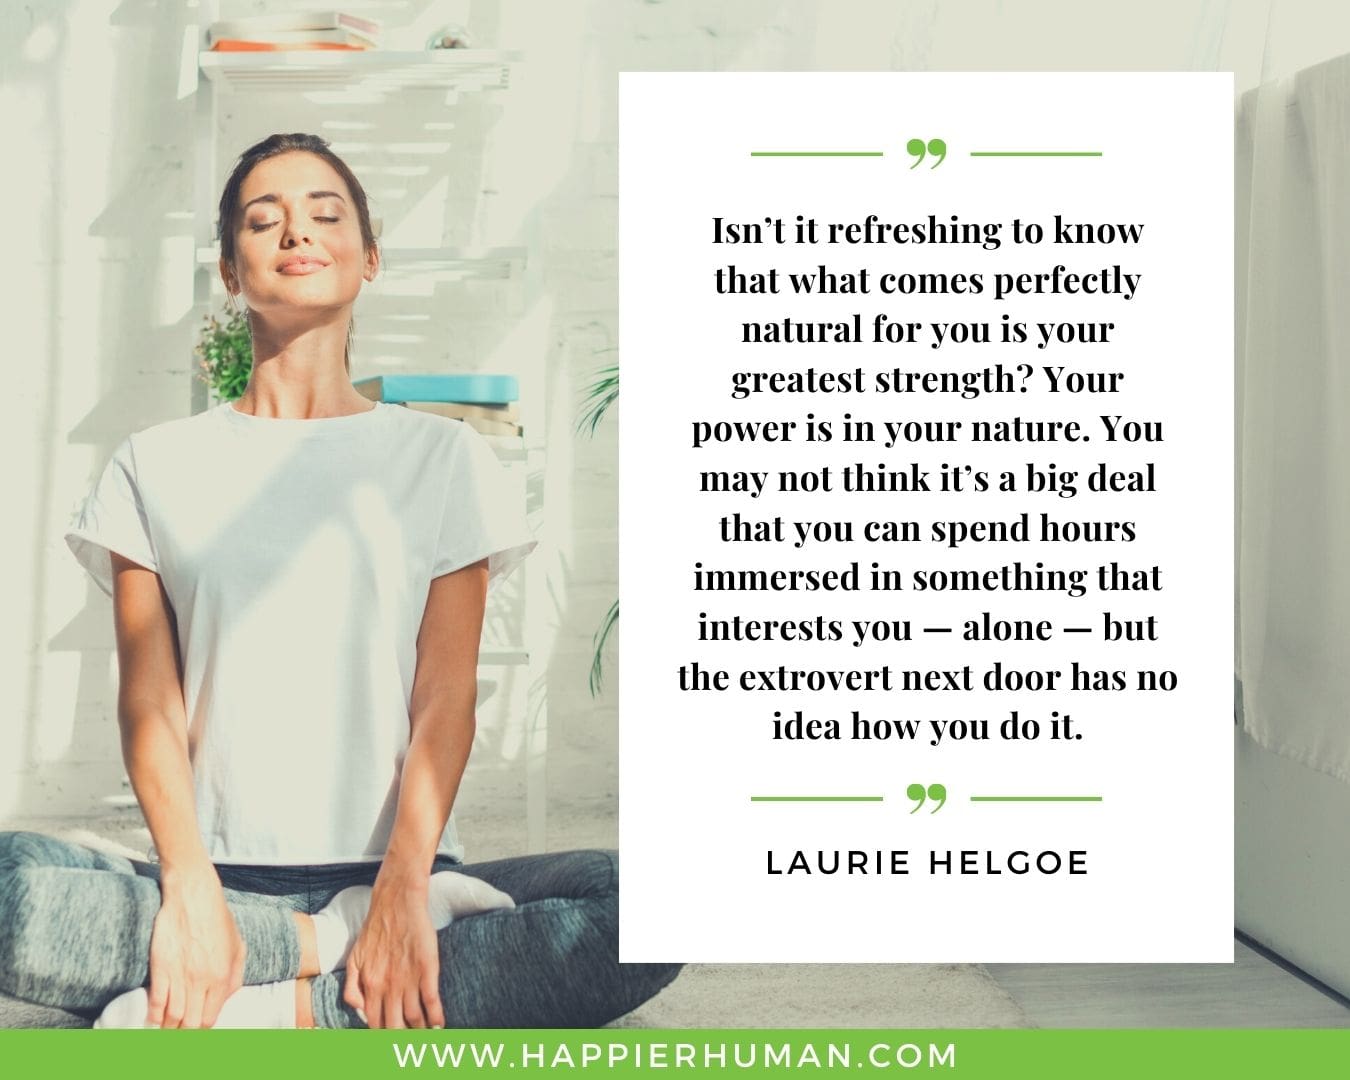 Introvert Quotes - “Isn’t it refreshing to know that what comes perfectly natural for you is your greatest strength? Your power is in your nature. You may not think it’s a big deal that you can spend hours immersed in something that interests you — alone — but the extrovert next door has no idea how you do it.” – Laurie Helgoe